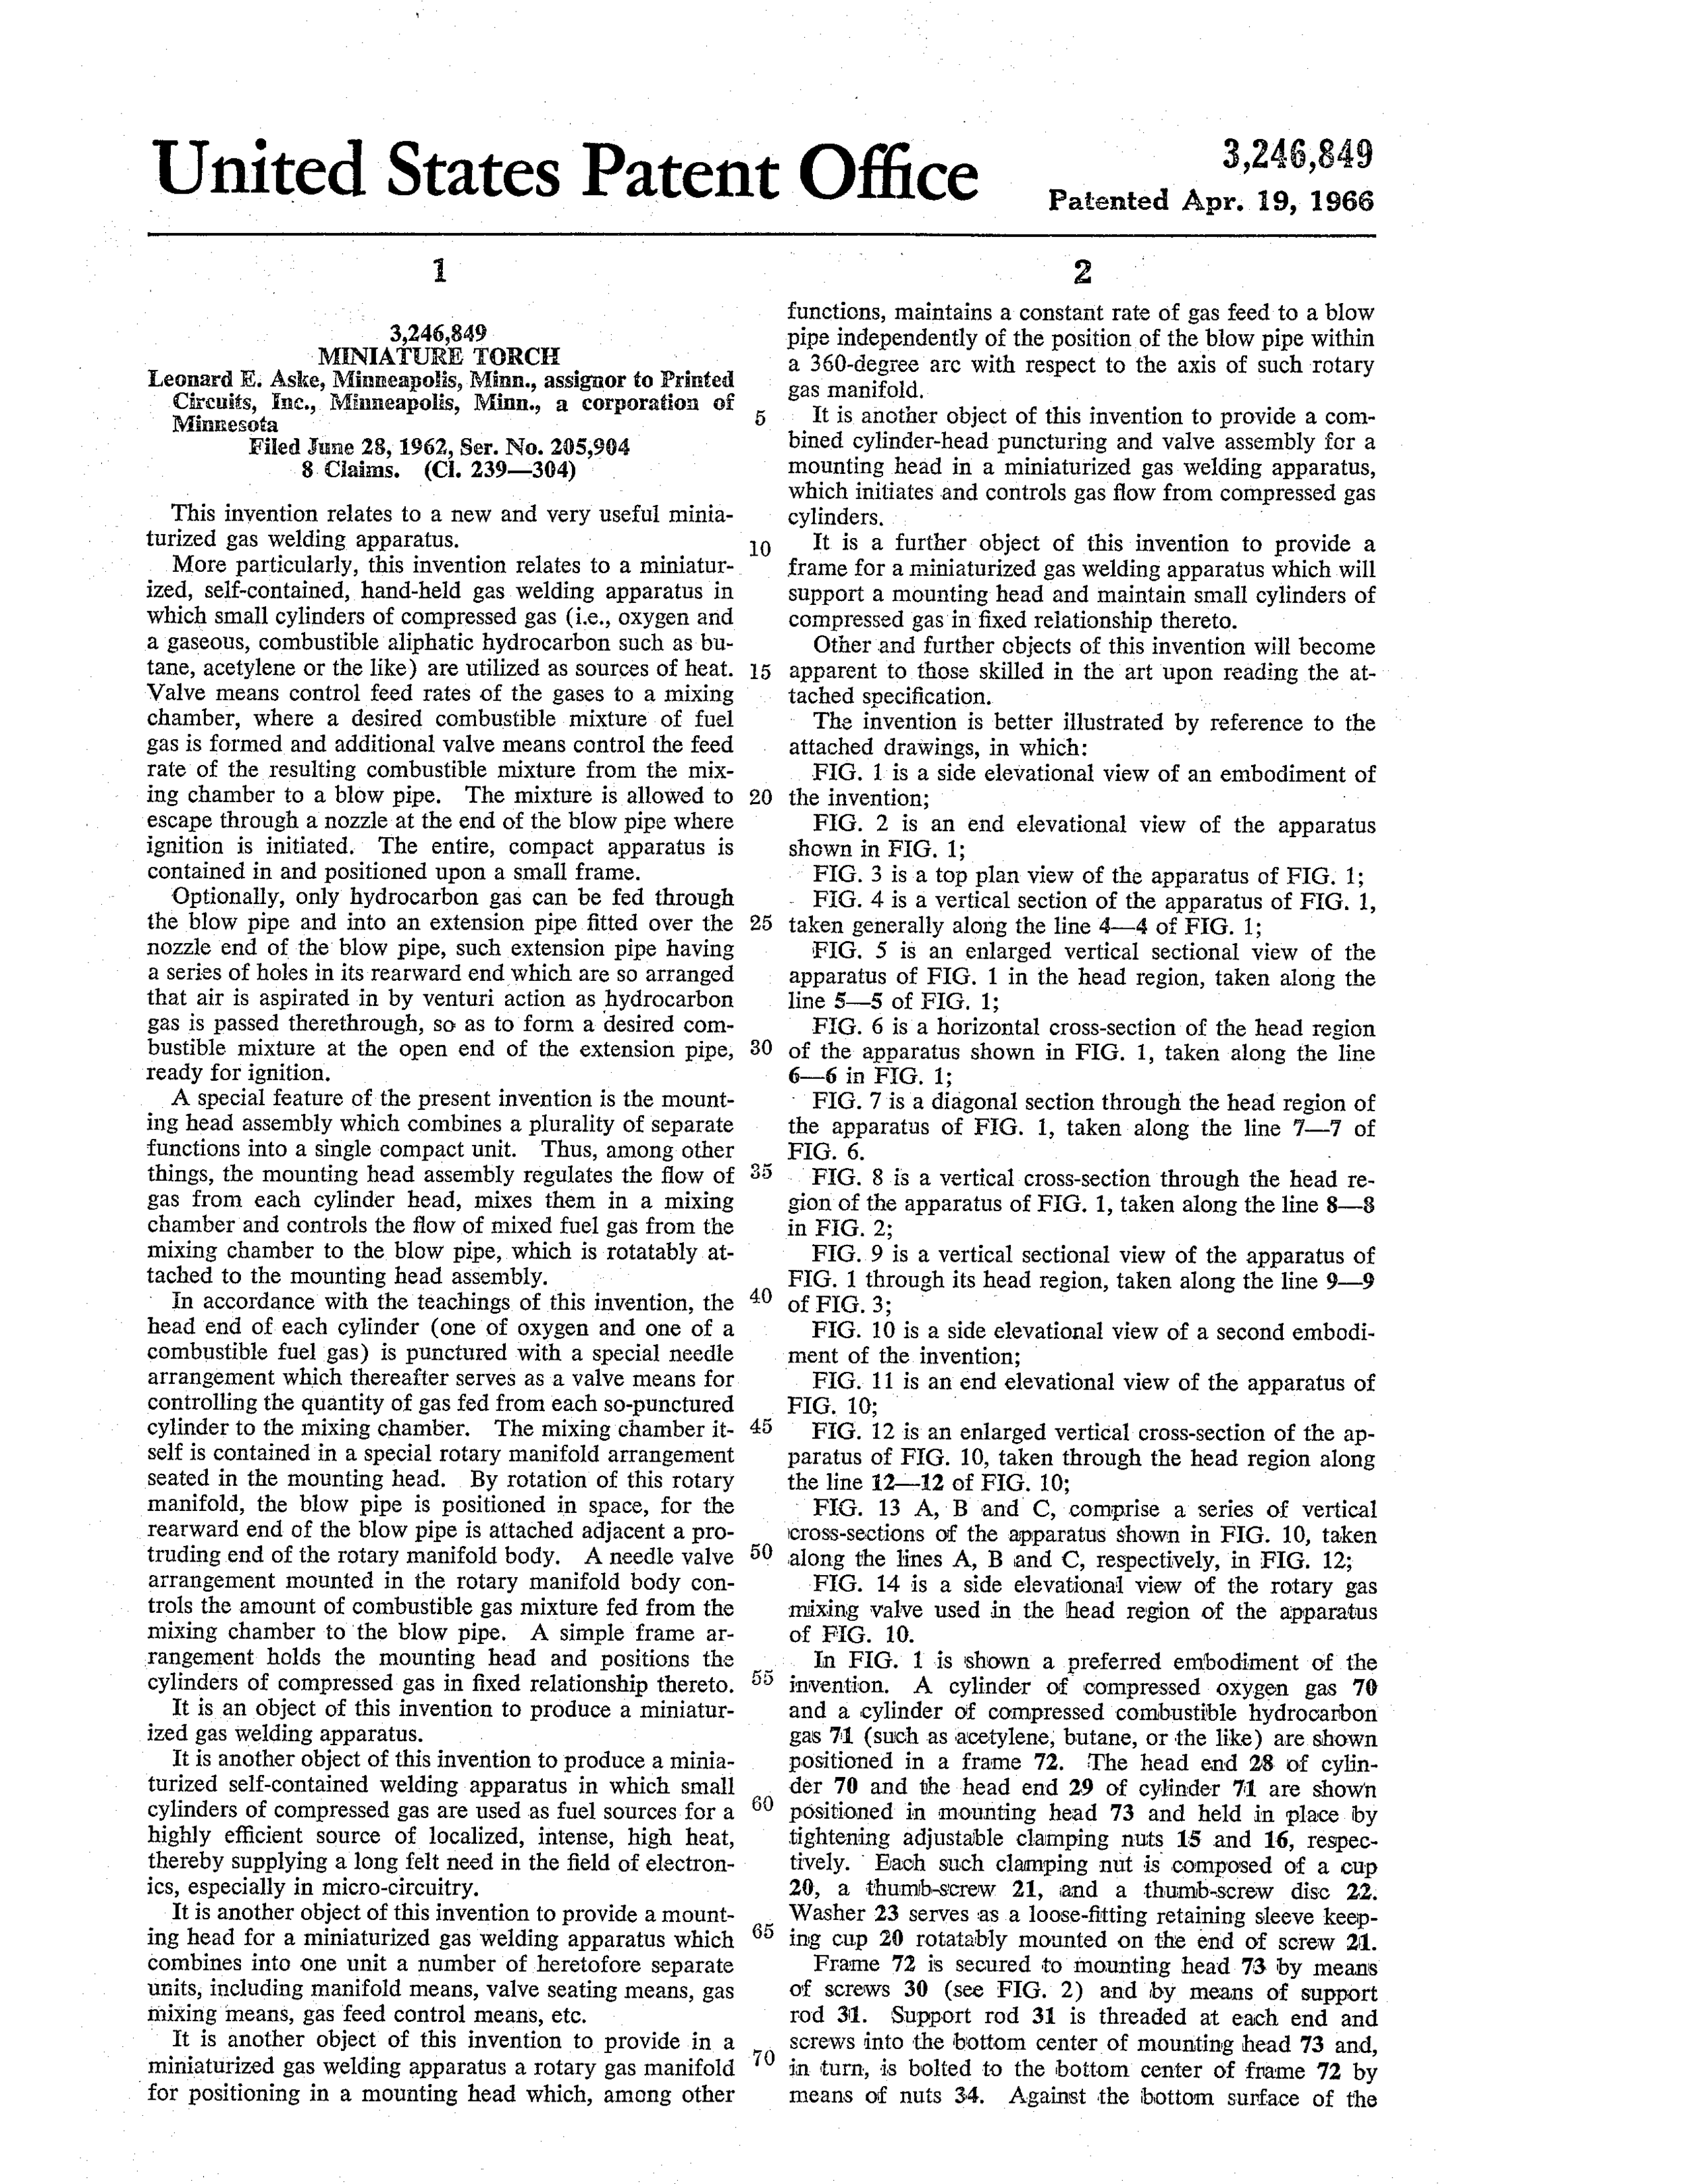 patent1_Page_4.png